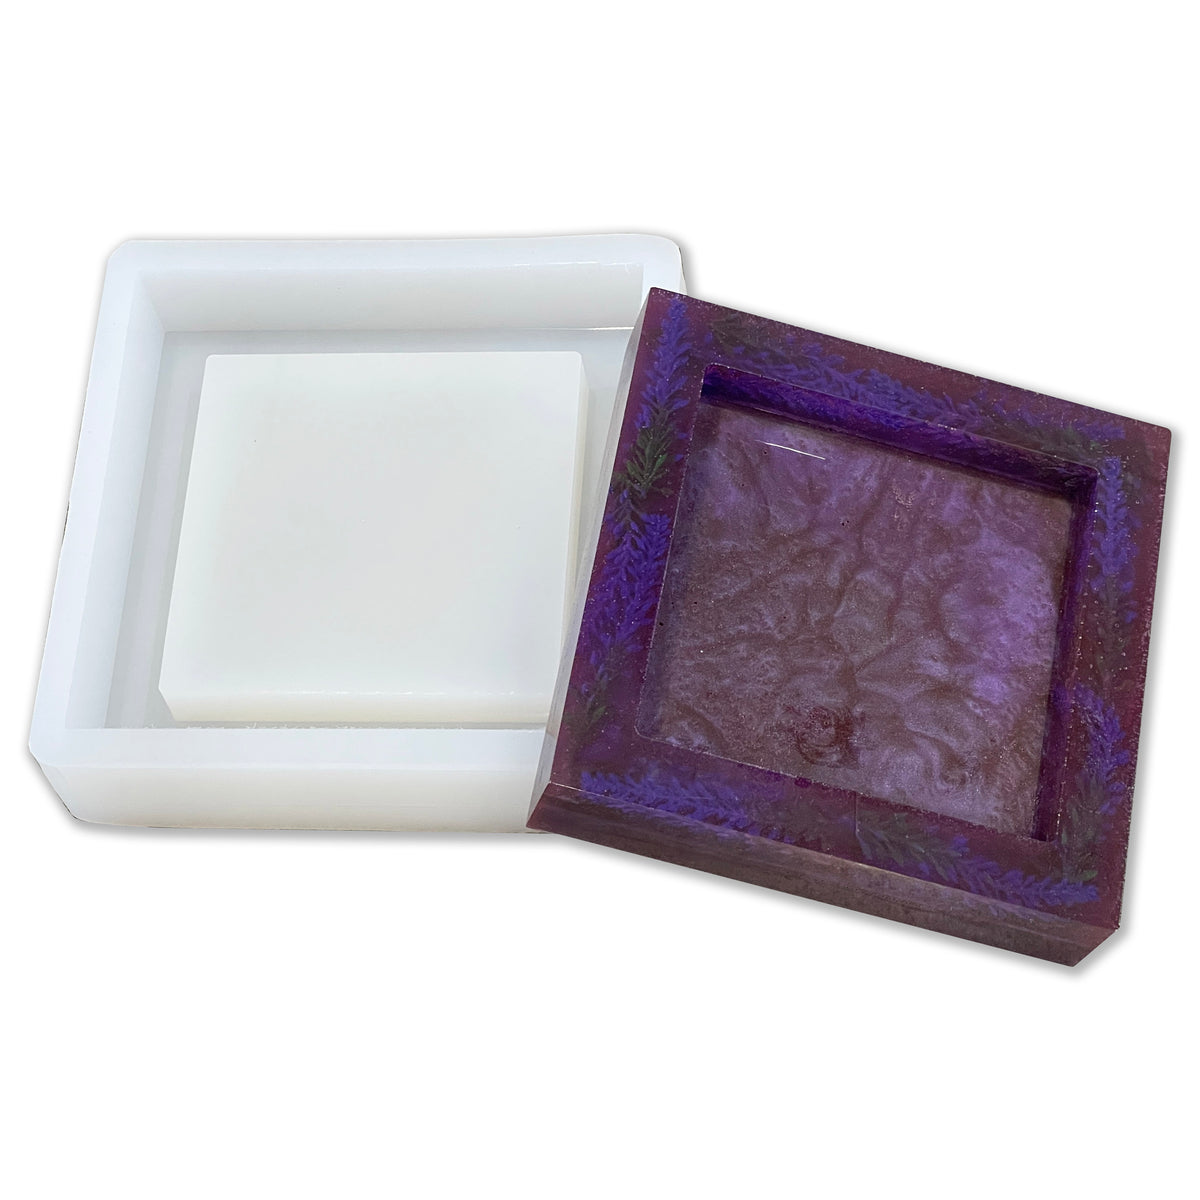 2 Deep Tray Molds For Epoxy Resin - 1 Wide Walls For Encasing